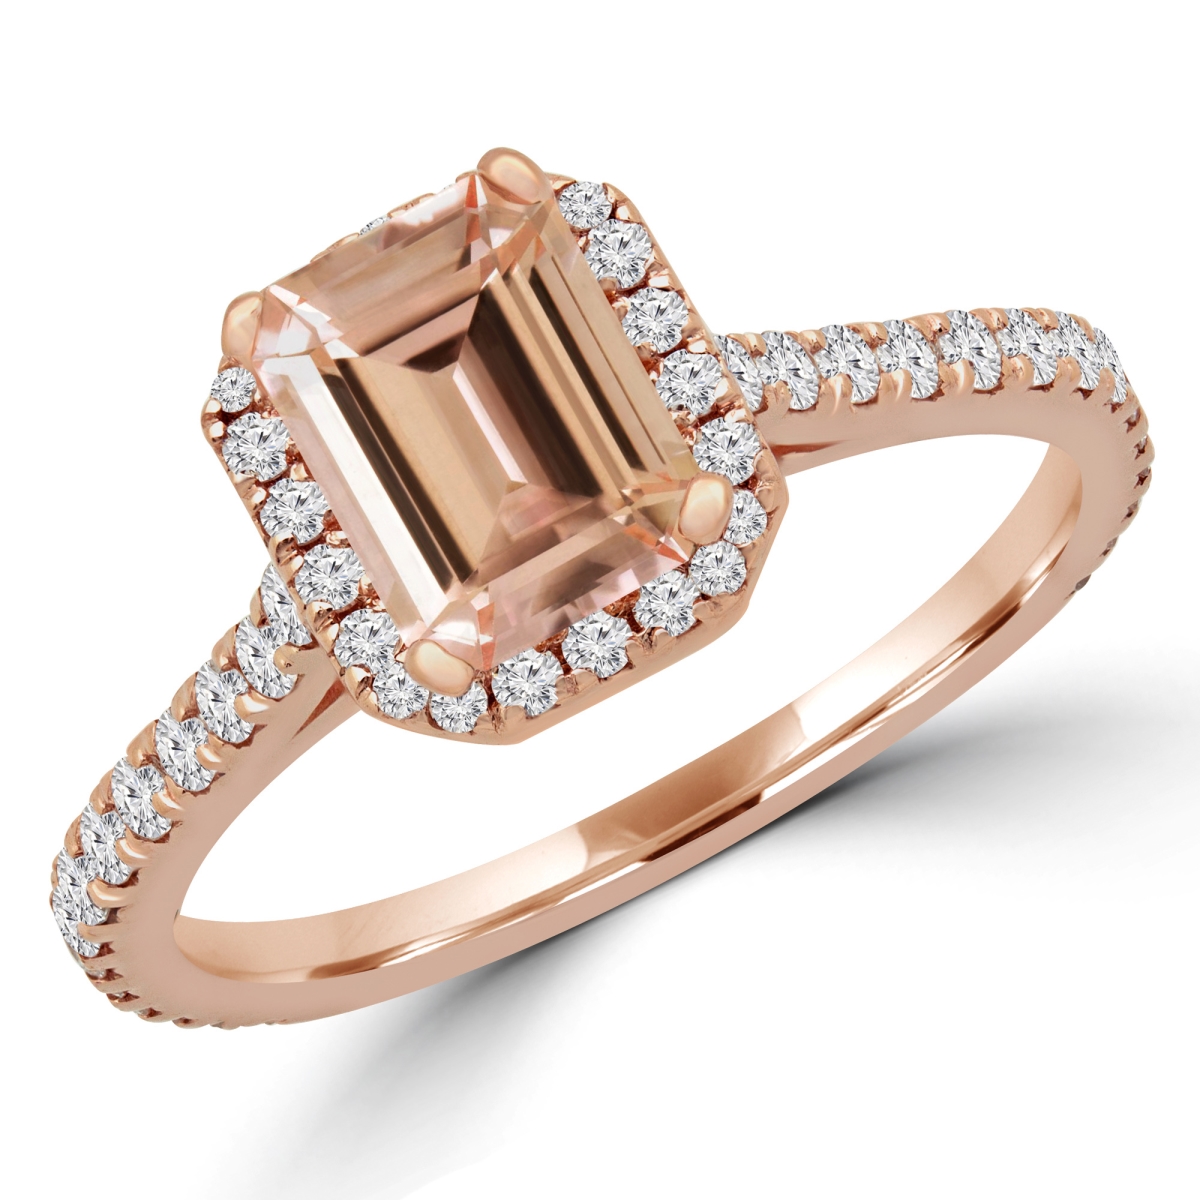 Picture of Majesty Diamonds MD180580-8.5 1.25 CTW Emerald Pink Morganite Halo Engagement Ring in 14K Rose Gold - Size 8.5